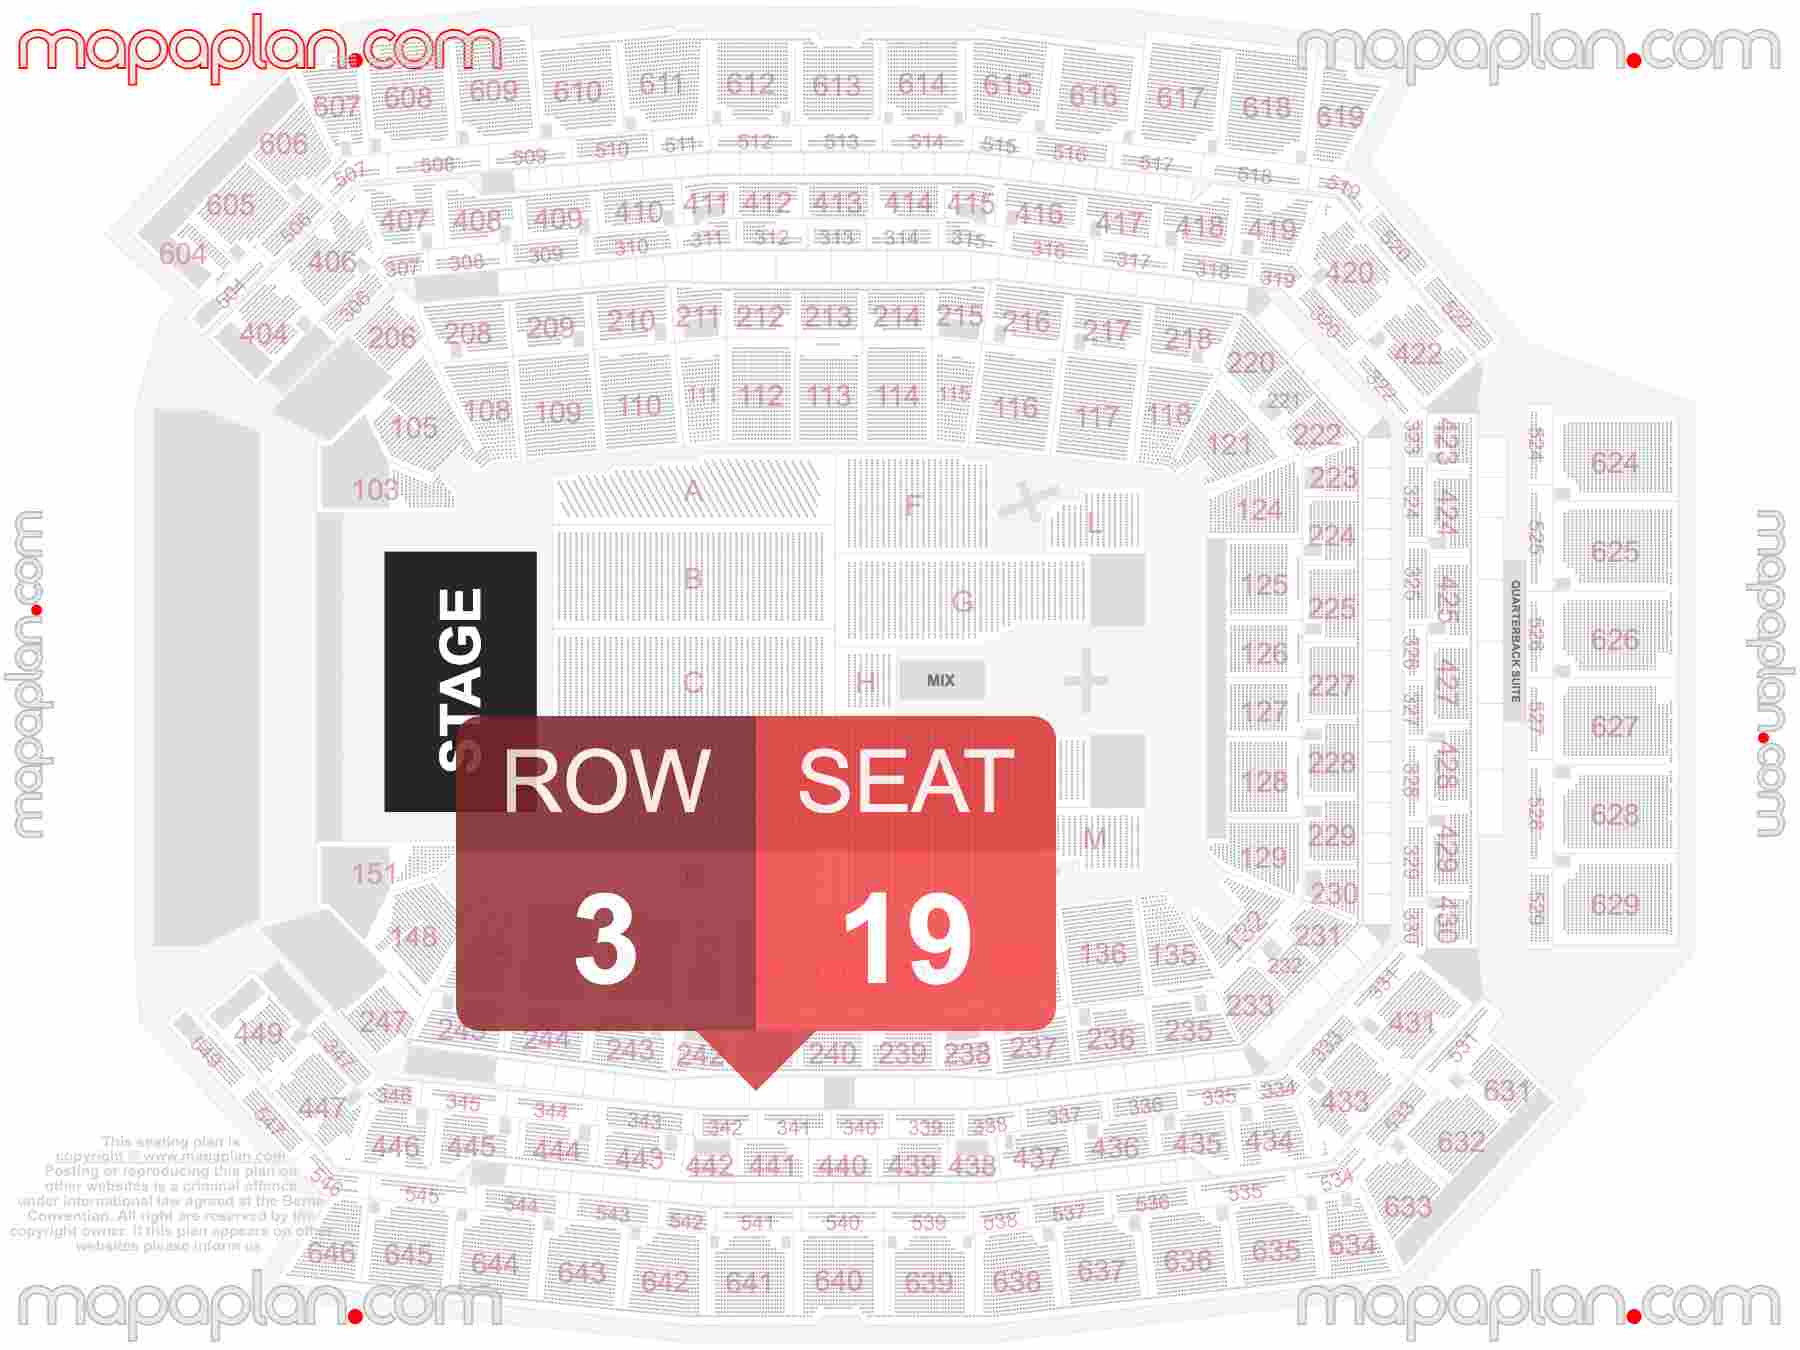 Indianapolis Lucas Oil Stadium seating chart Concert detailed seat numbers and row numbering chart with interactive map plan layout